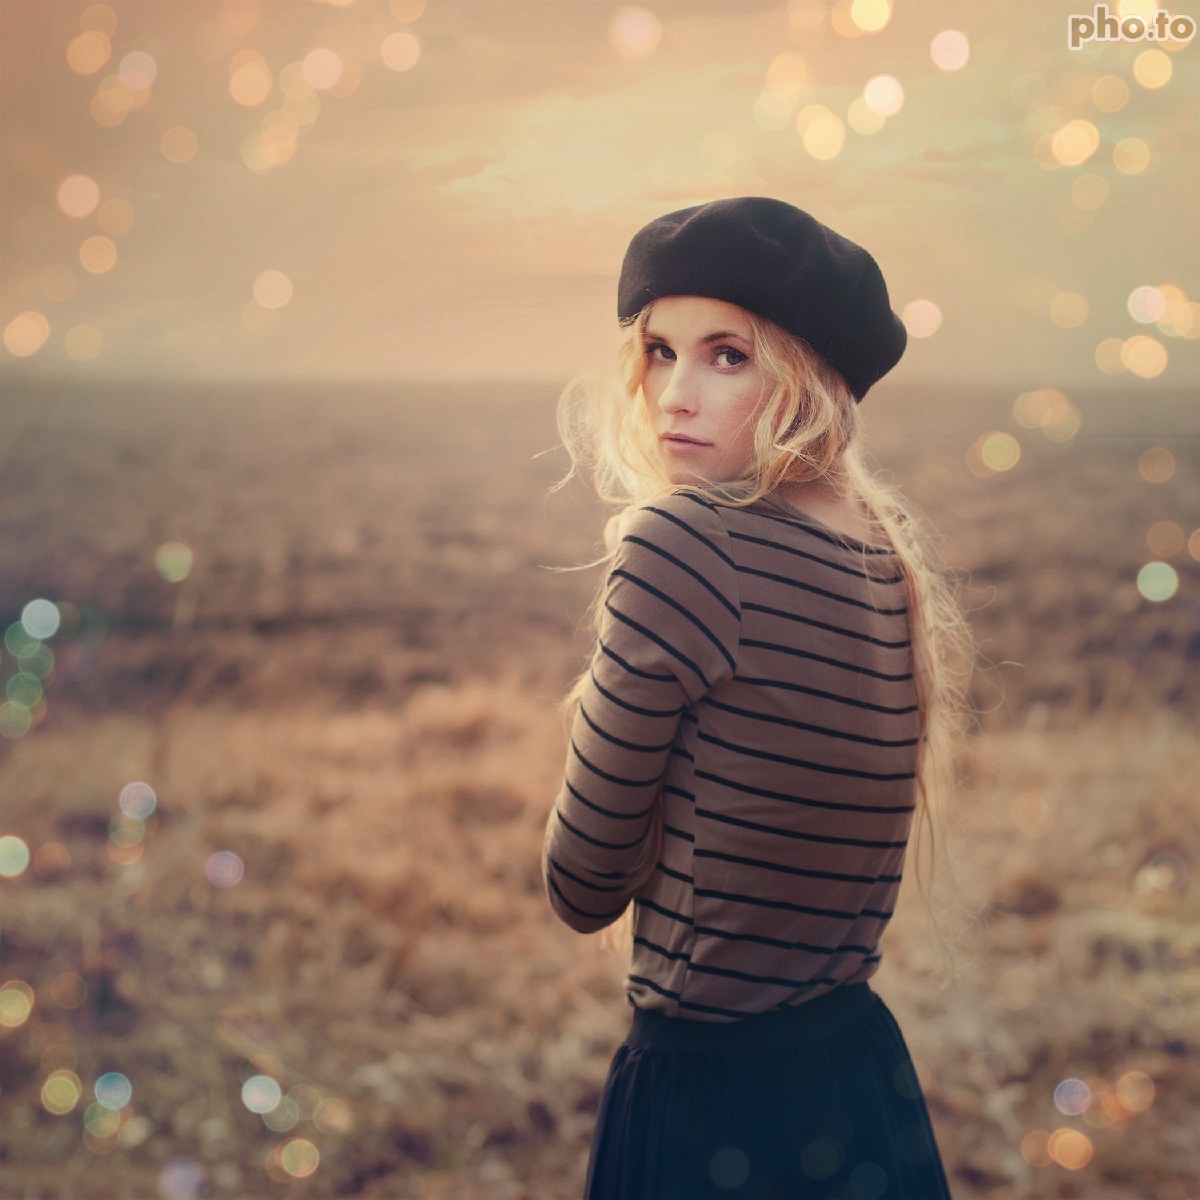 Add Bokeh Effect Online To Adorn Pics With Blurred Lights